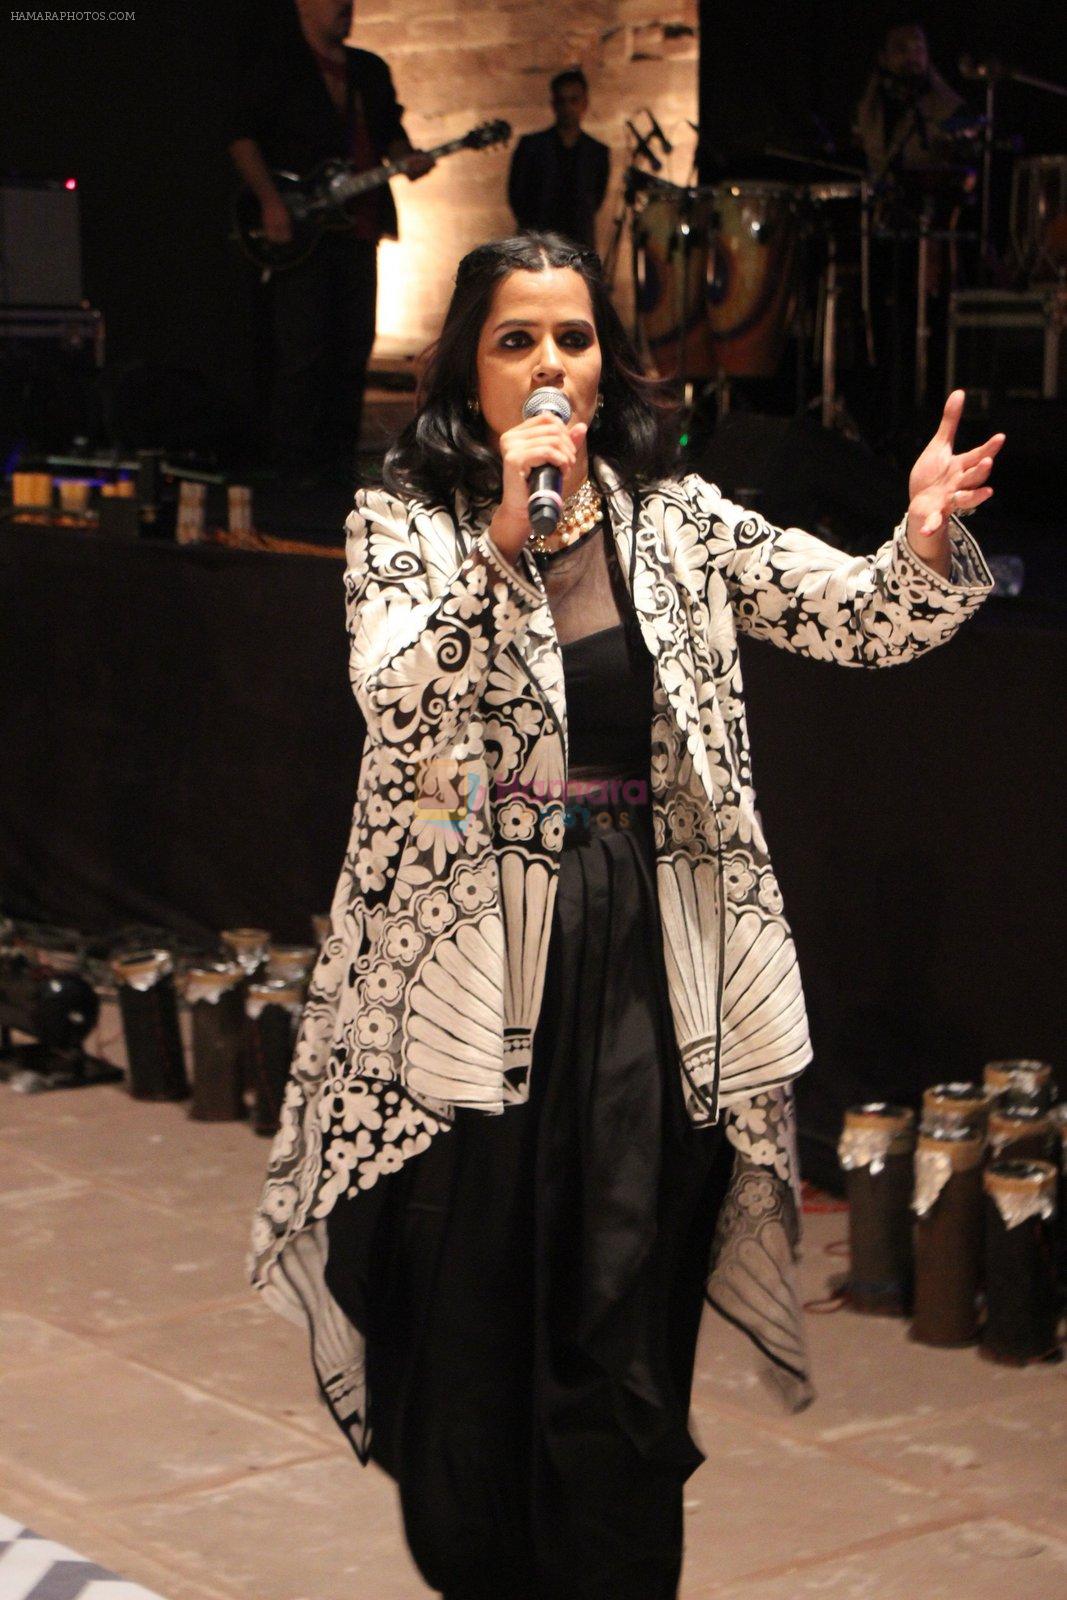 Sona Mohapatra performing at Mehrangarh Fort, a UNESCO heritage site, Jodhpur on 5th Feb 2016